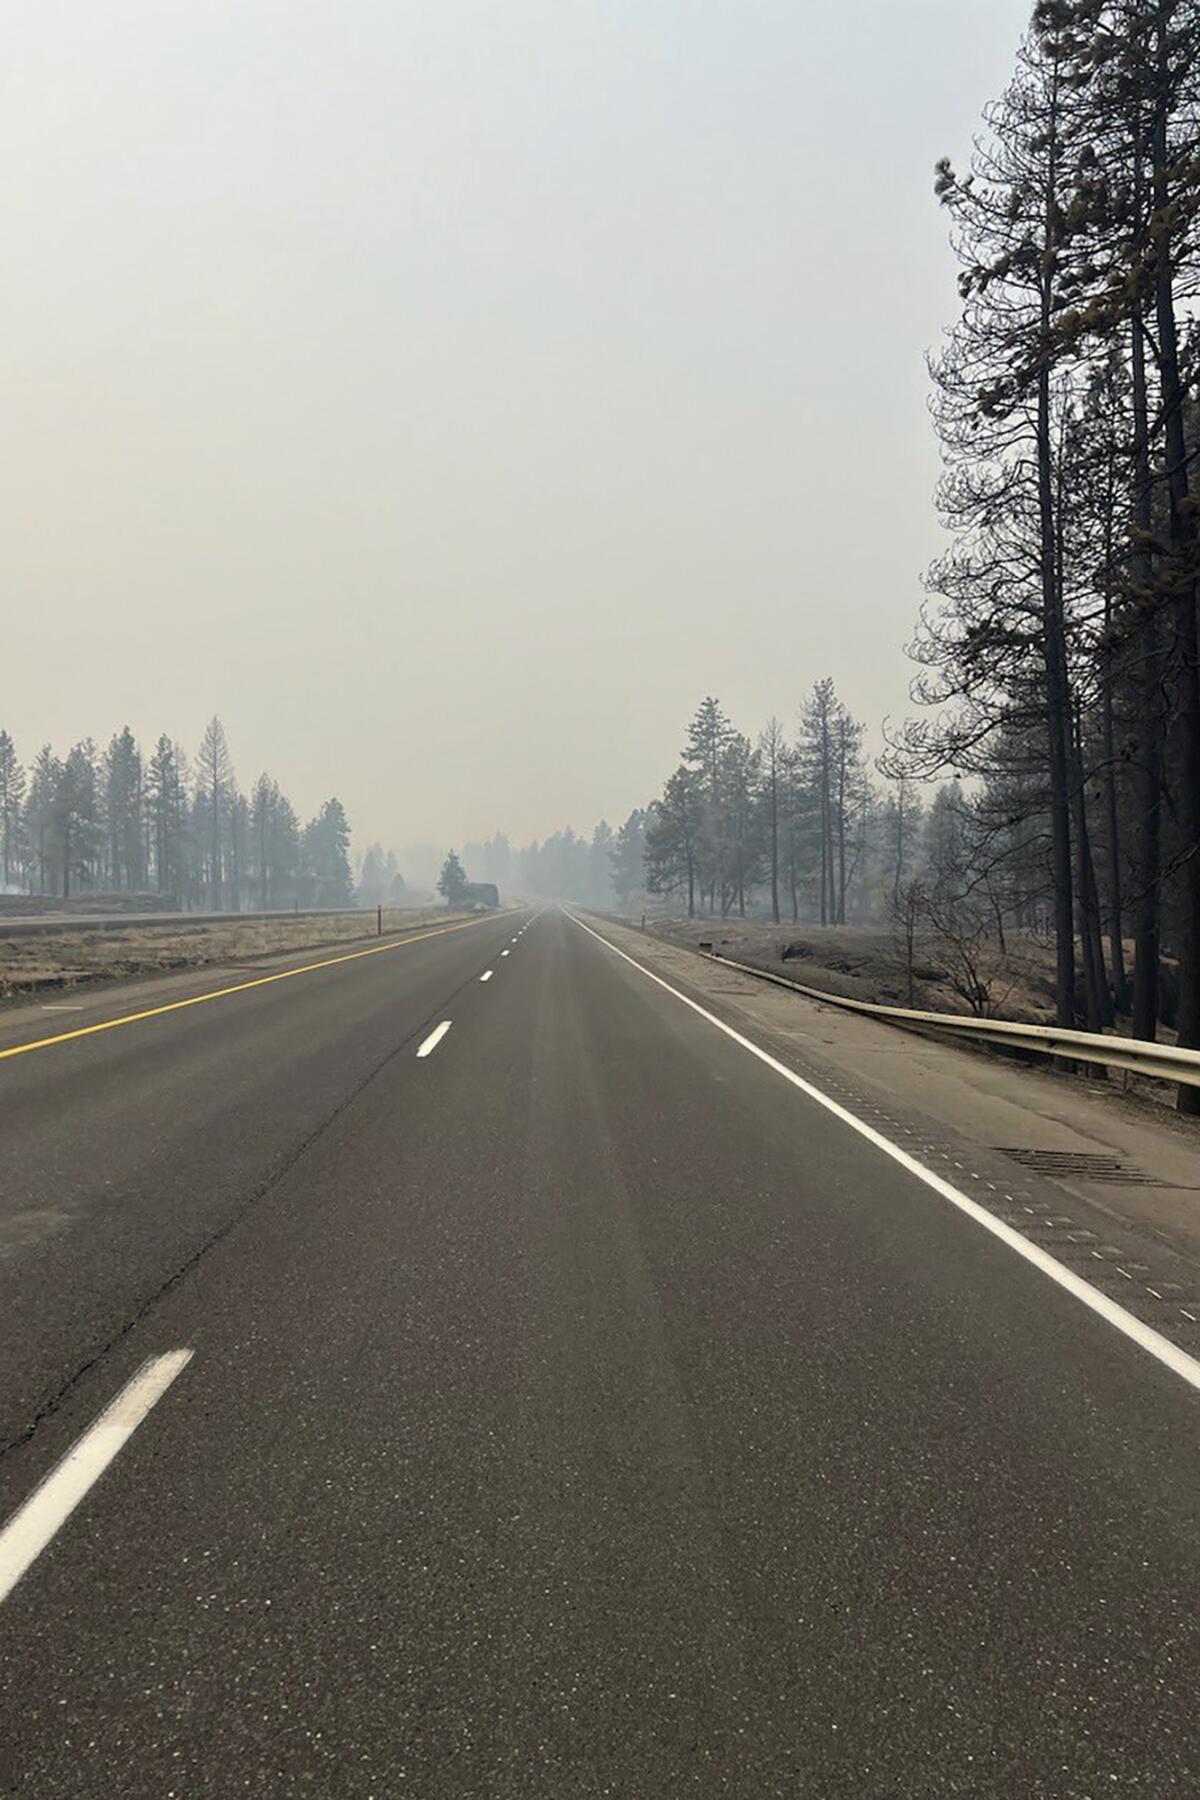 Smoke obscures blackened evergreens and the sky at the far end of a highway that stretches into the distance